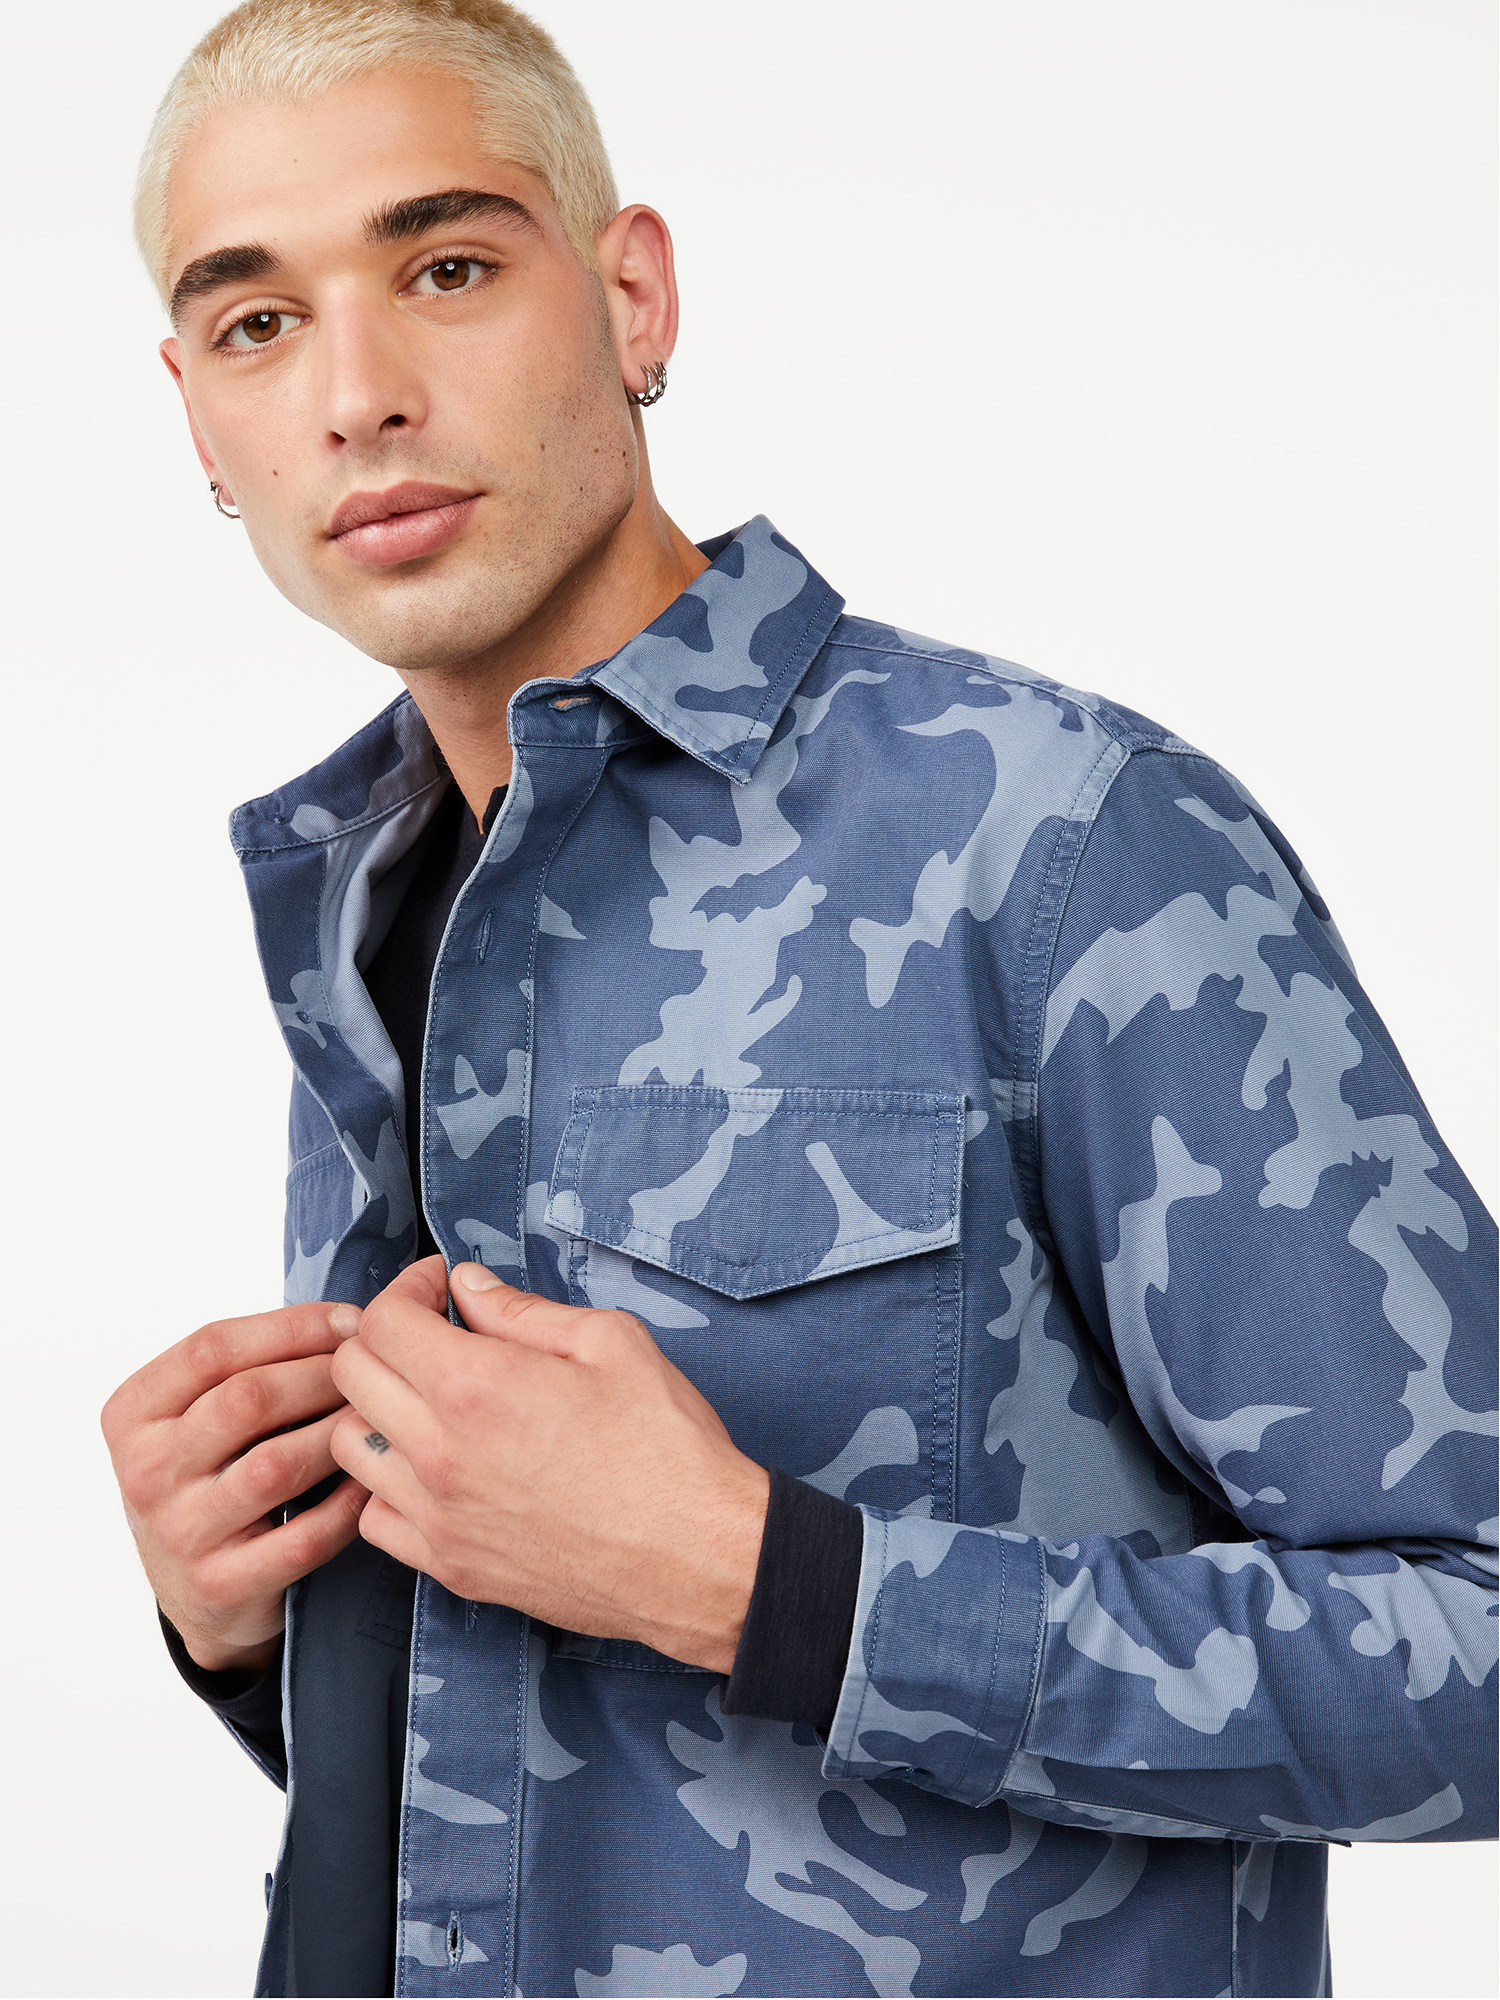 Free Assembly Men's Cotton Canvas Shirt Jacket - image 4 of 5